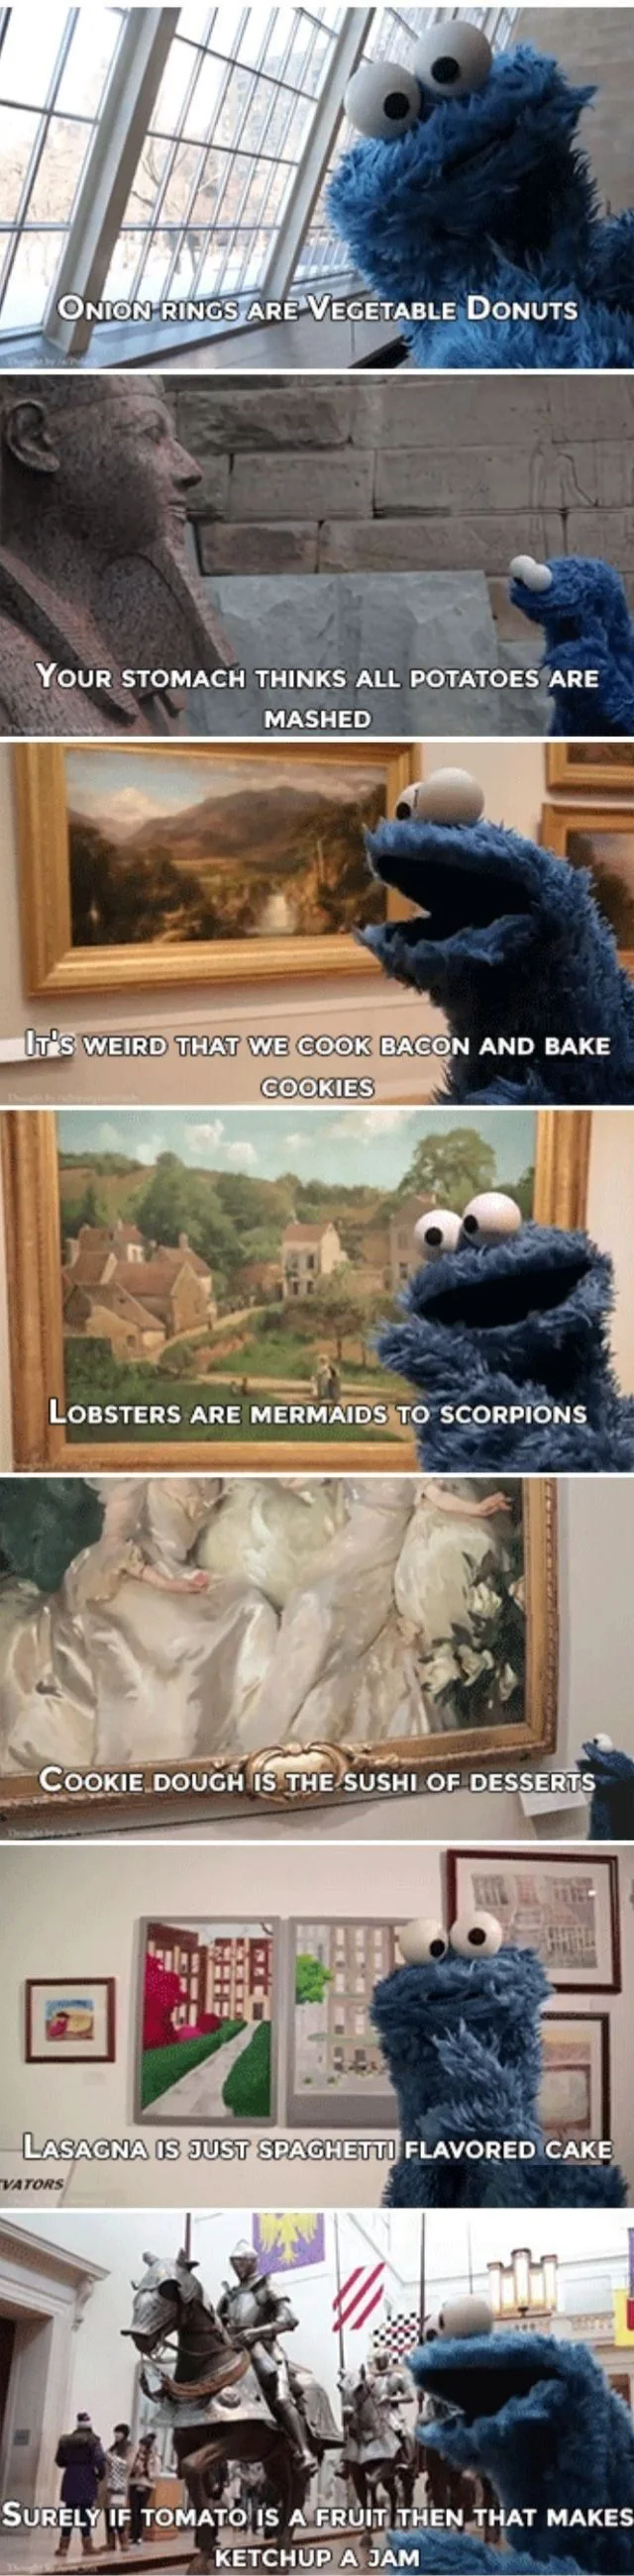 cookie monster explains life from other valid perspectives, onion rings are vegetable donuts, your stomach thinks all potatoes are mashed, cookie dough is the sushi of desserts, lasagna is just spaghetti flavored cake